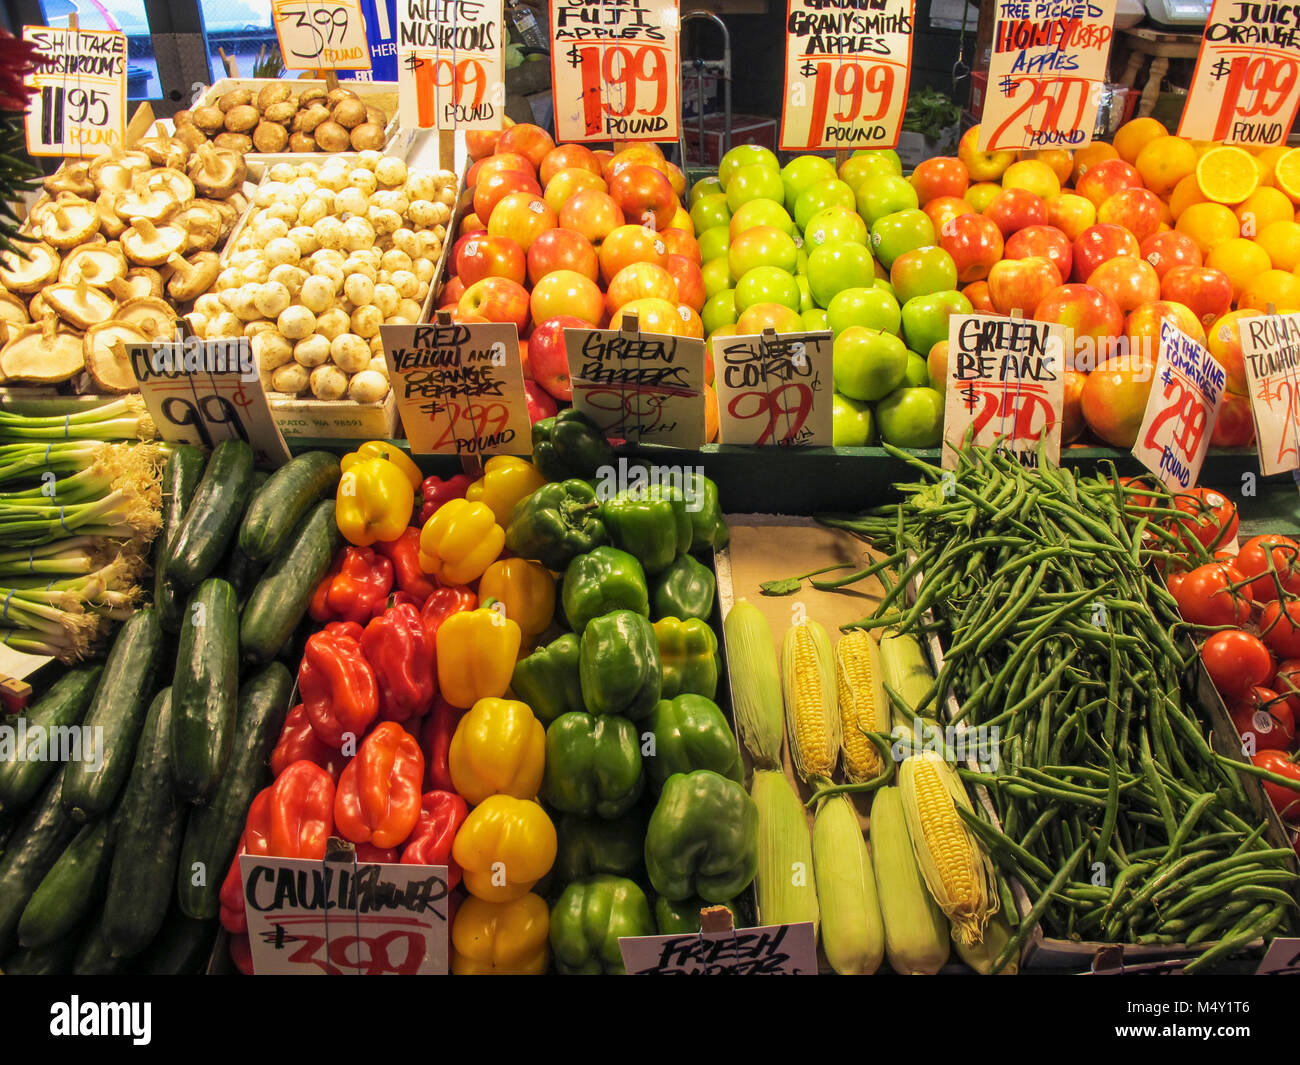 Fruit and vegetable stall Stock Photo